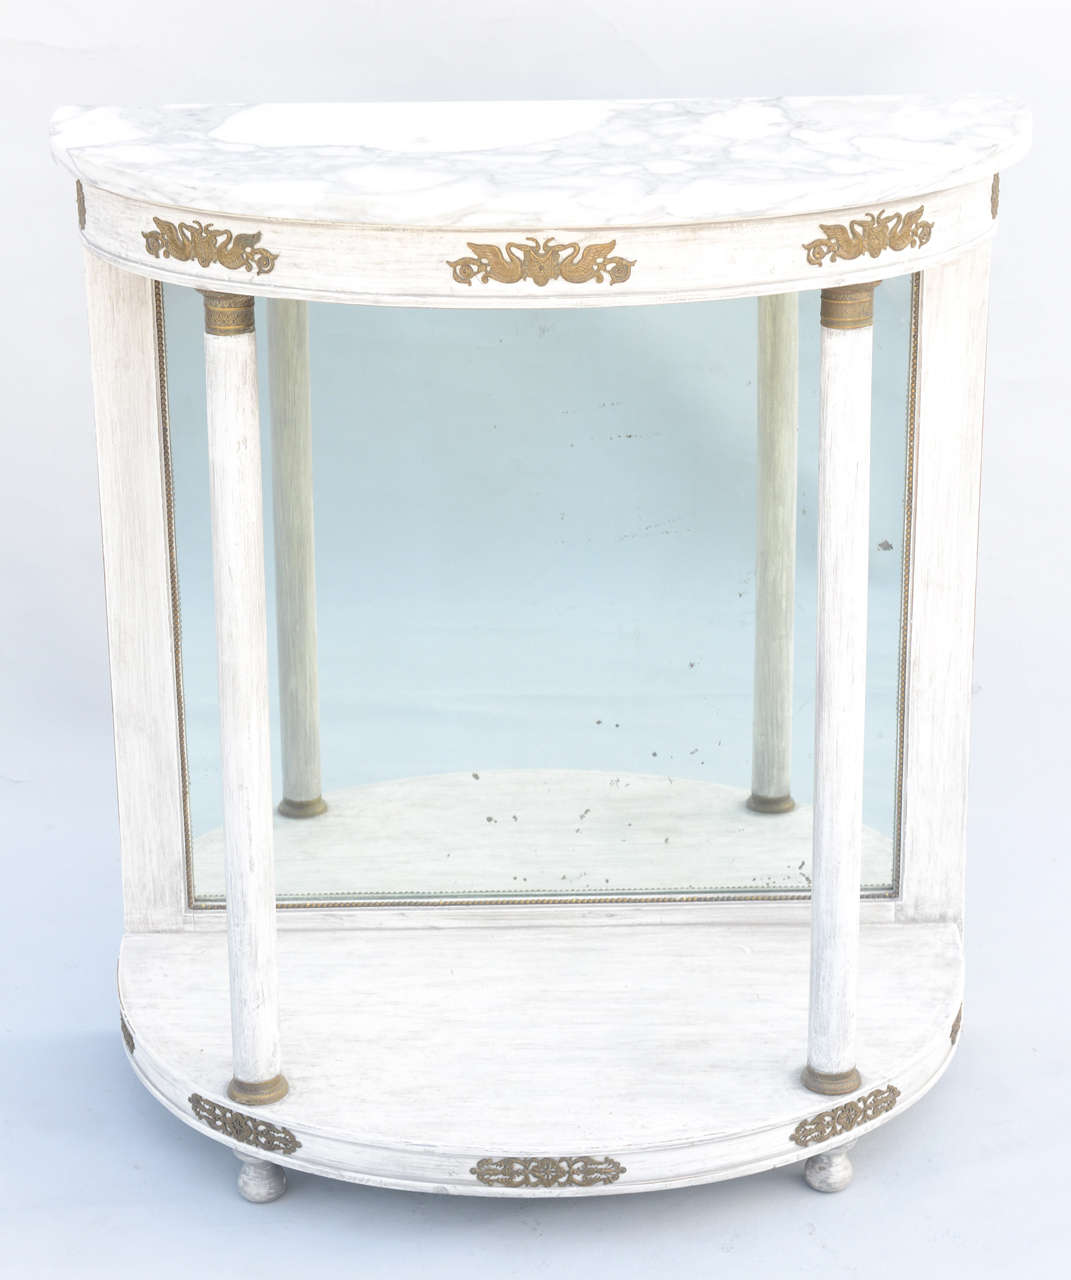 Demilune console, with top of Carrara marble, on painted base, having two round columns supporting its ormolu embellished apron and conforming platform, with a back of distressed mirrorplate framed with cockbeading, raised on bun feet.

Stock ID: